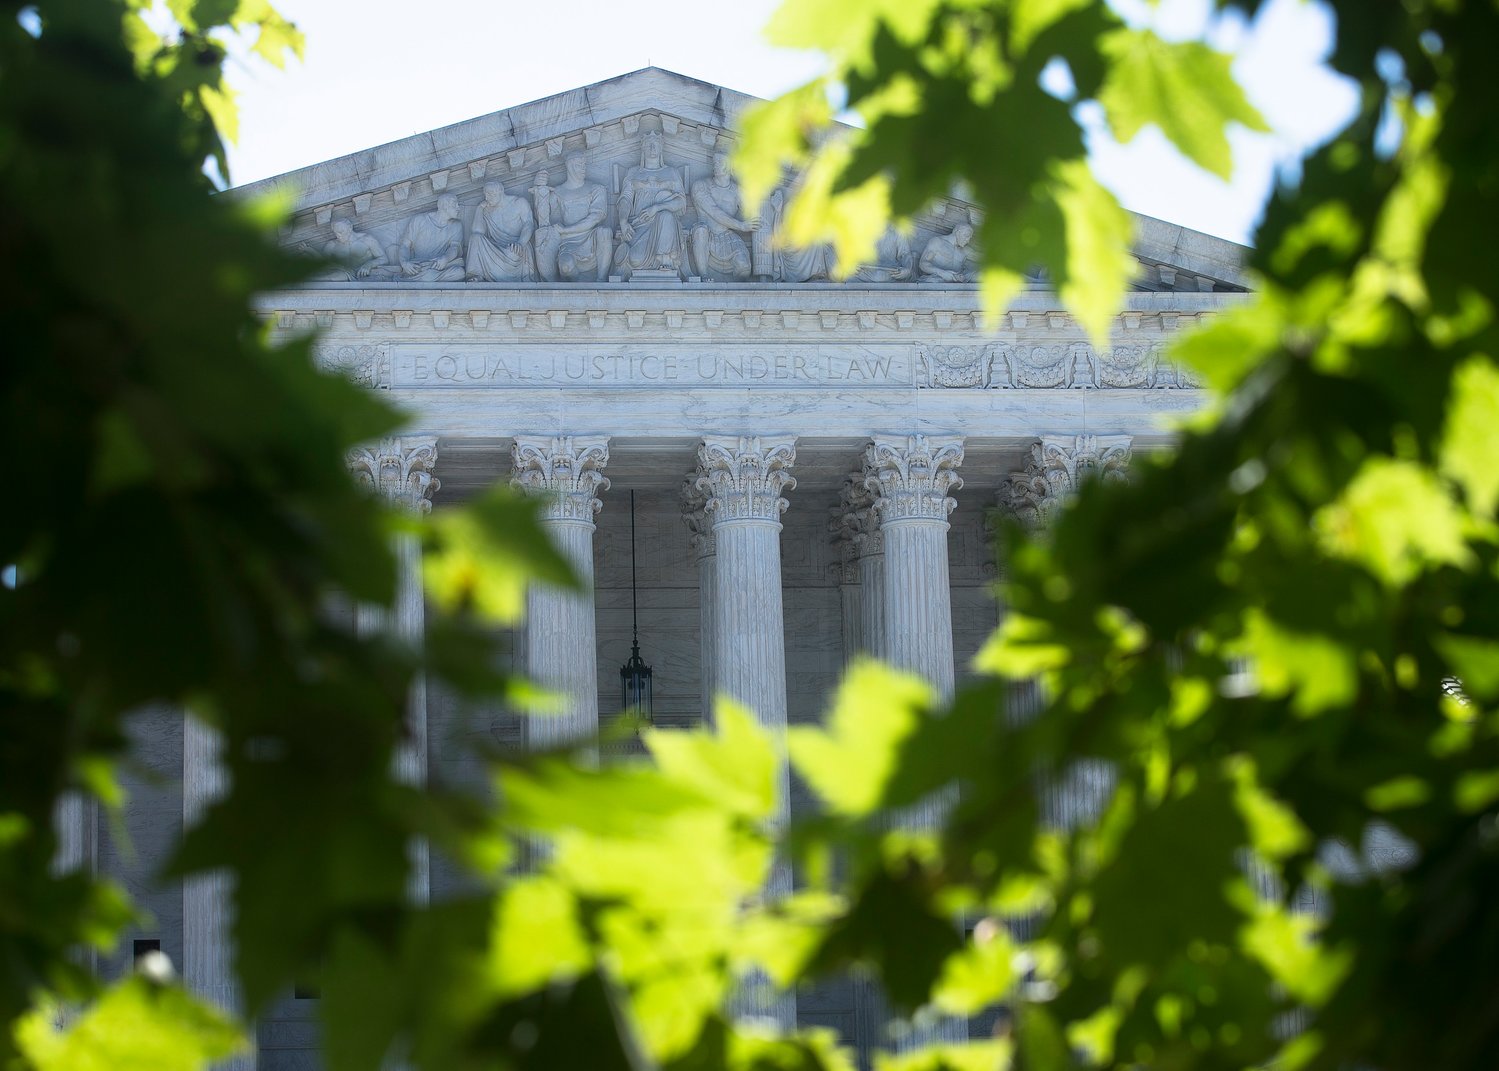 The Supreme Court is seen in Washington, D.C. June 15.